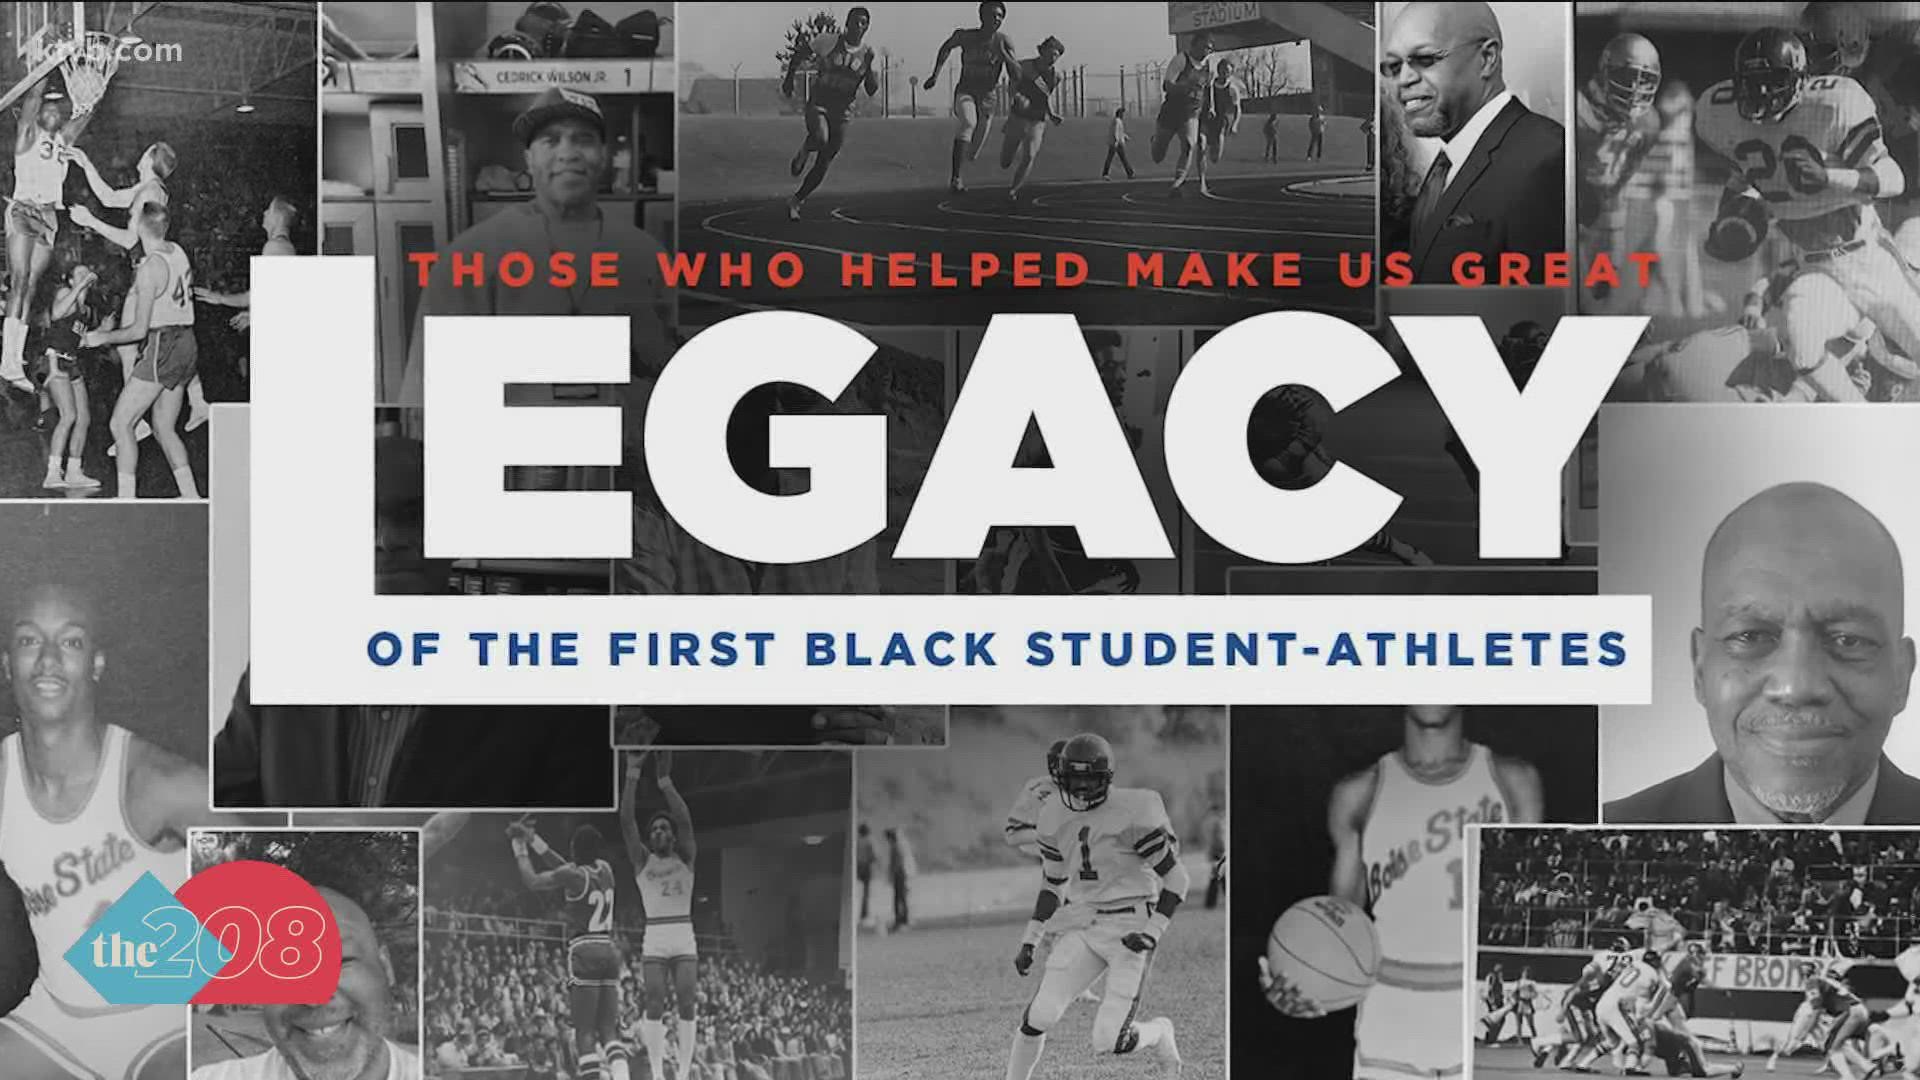 Bronco legends from decades past will tell you, success is rooted in a long and storied history of athlete acceptance and outreach from the university.